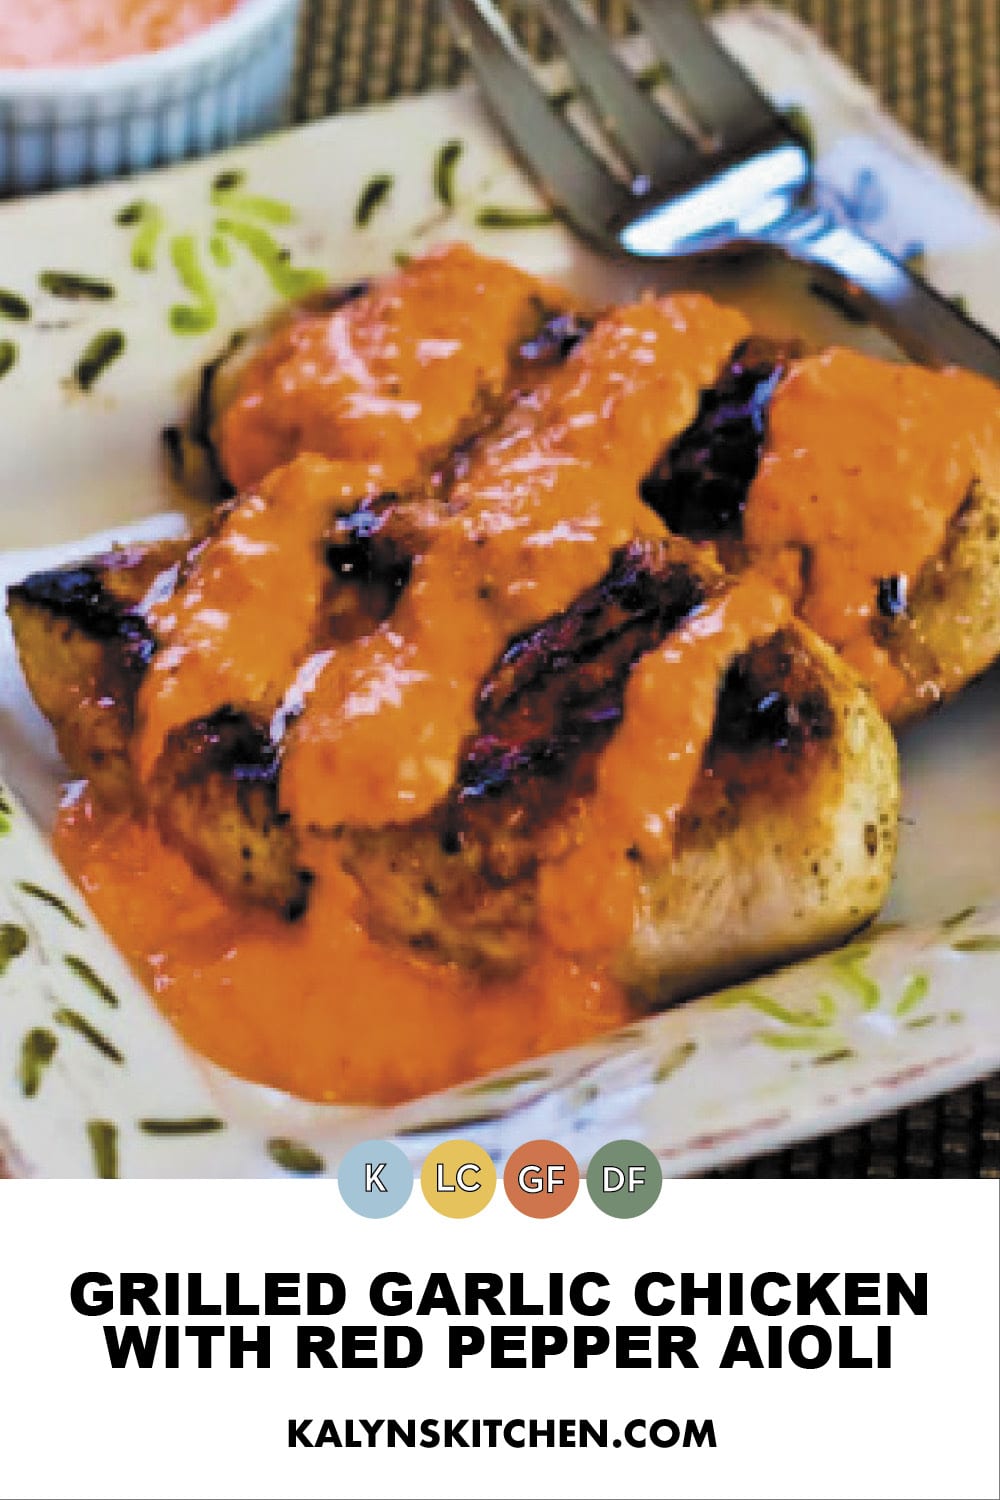 Pinterest image of Grilled Garlic Chicken with Red Pepper Aioli